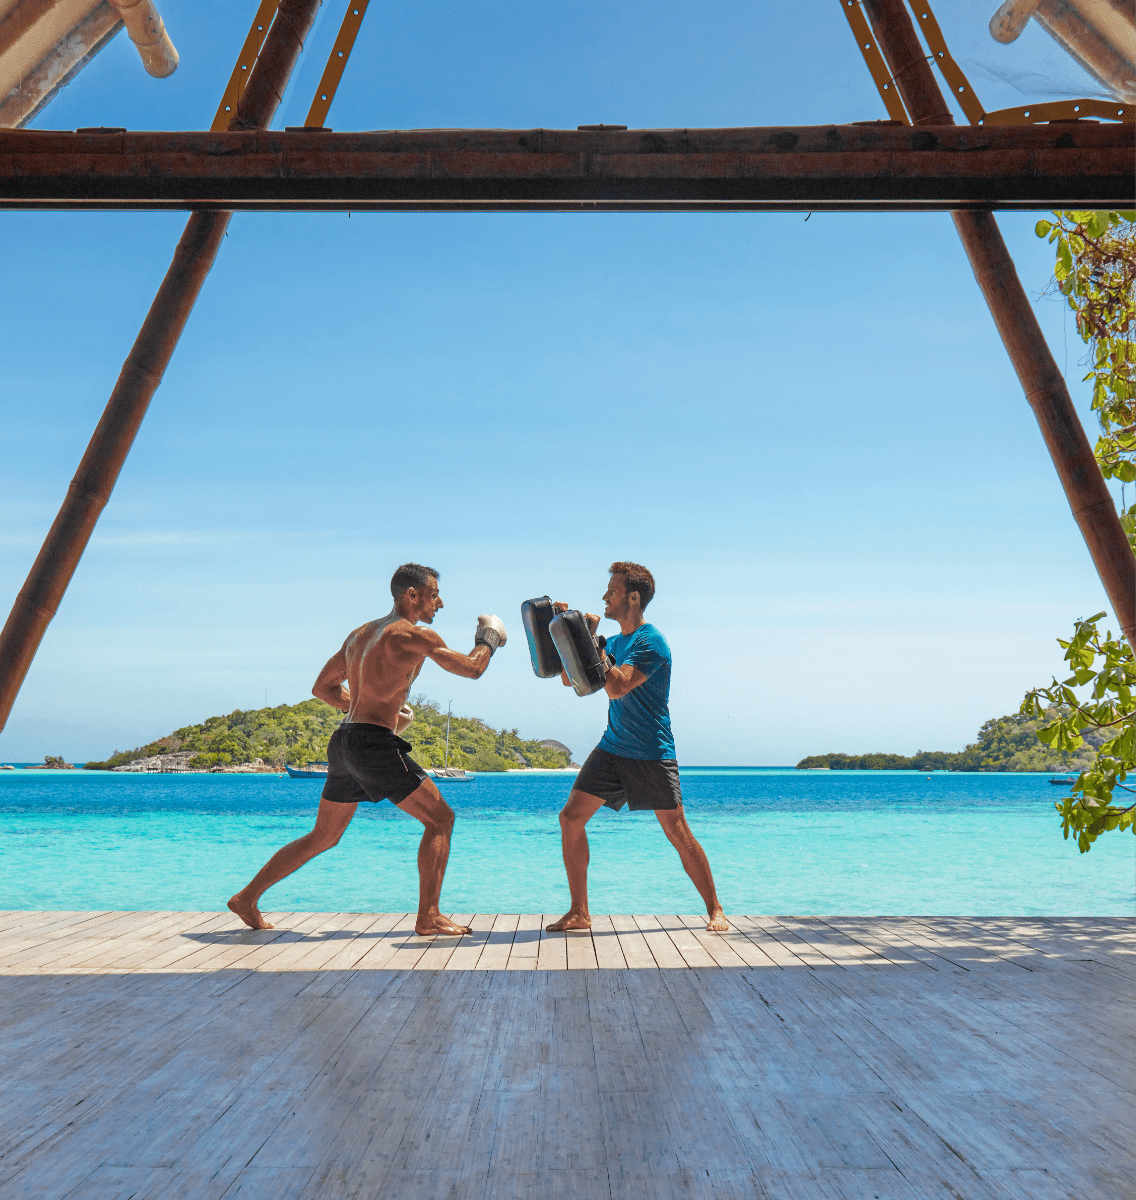 Guests at the Aura wellbeing centre yoga deck practicing boxing, activities at Bawah Reserve, private island hotel and resort, Indonesia